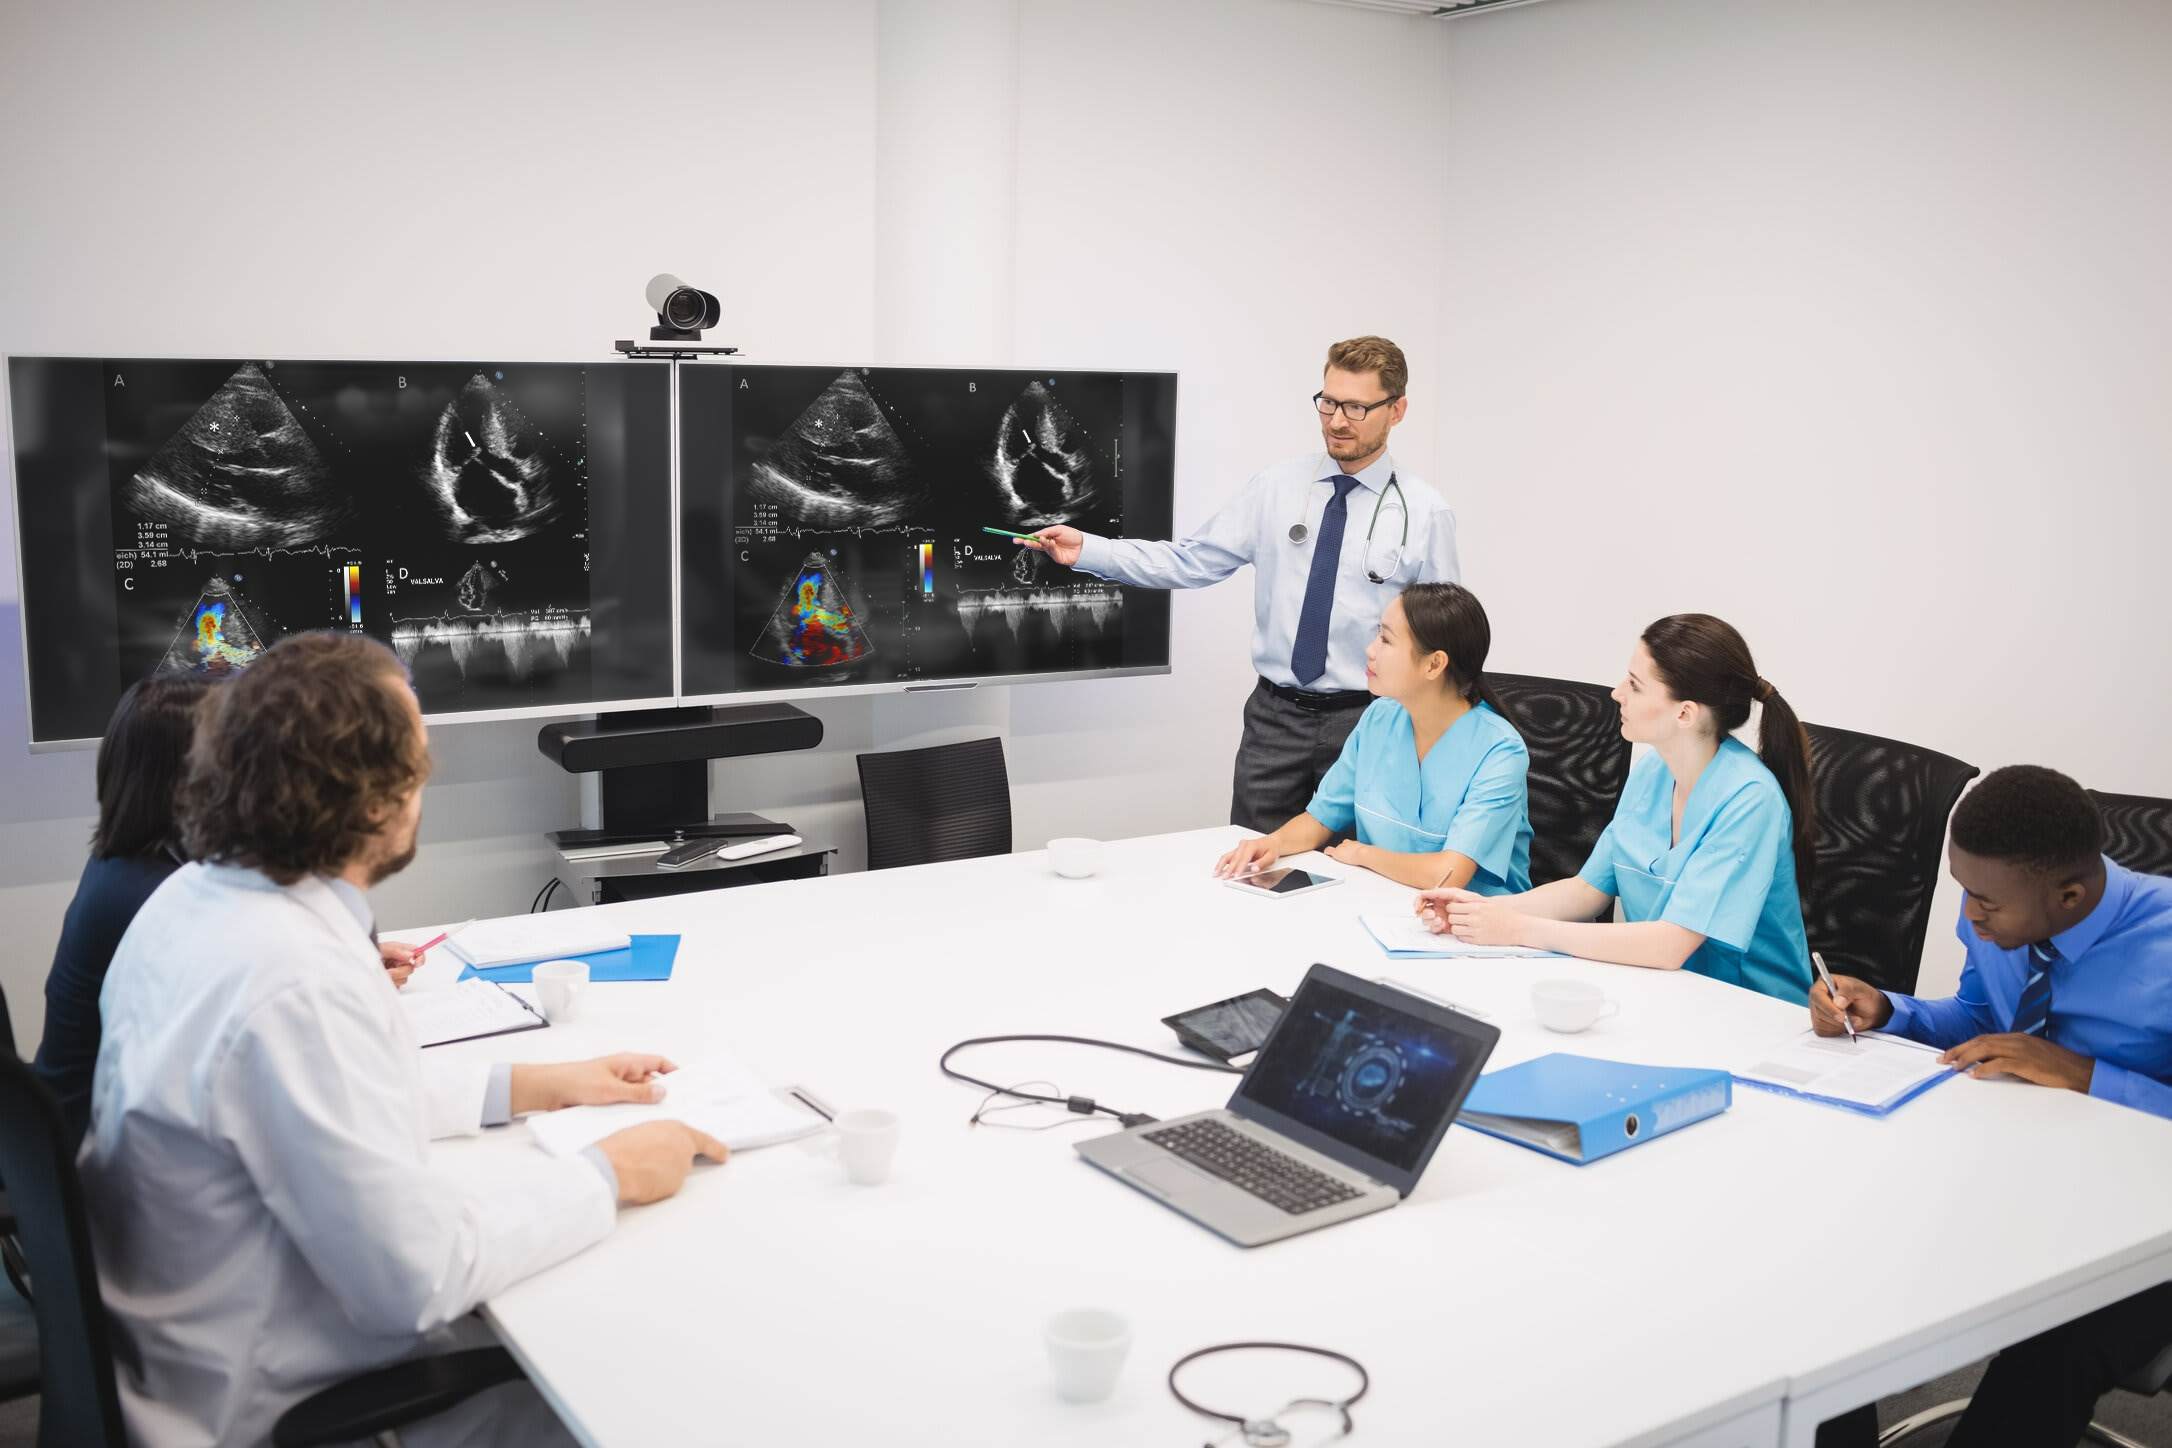 Heartscope Training Institute specialises in echocardiography training that combines theoretical & practical, gearing you up for your healthcare career.